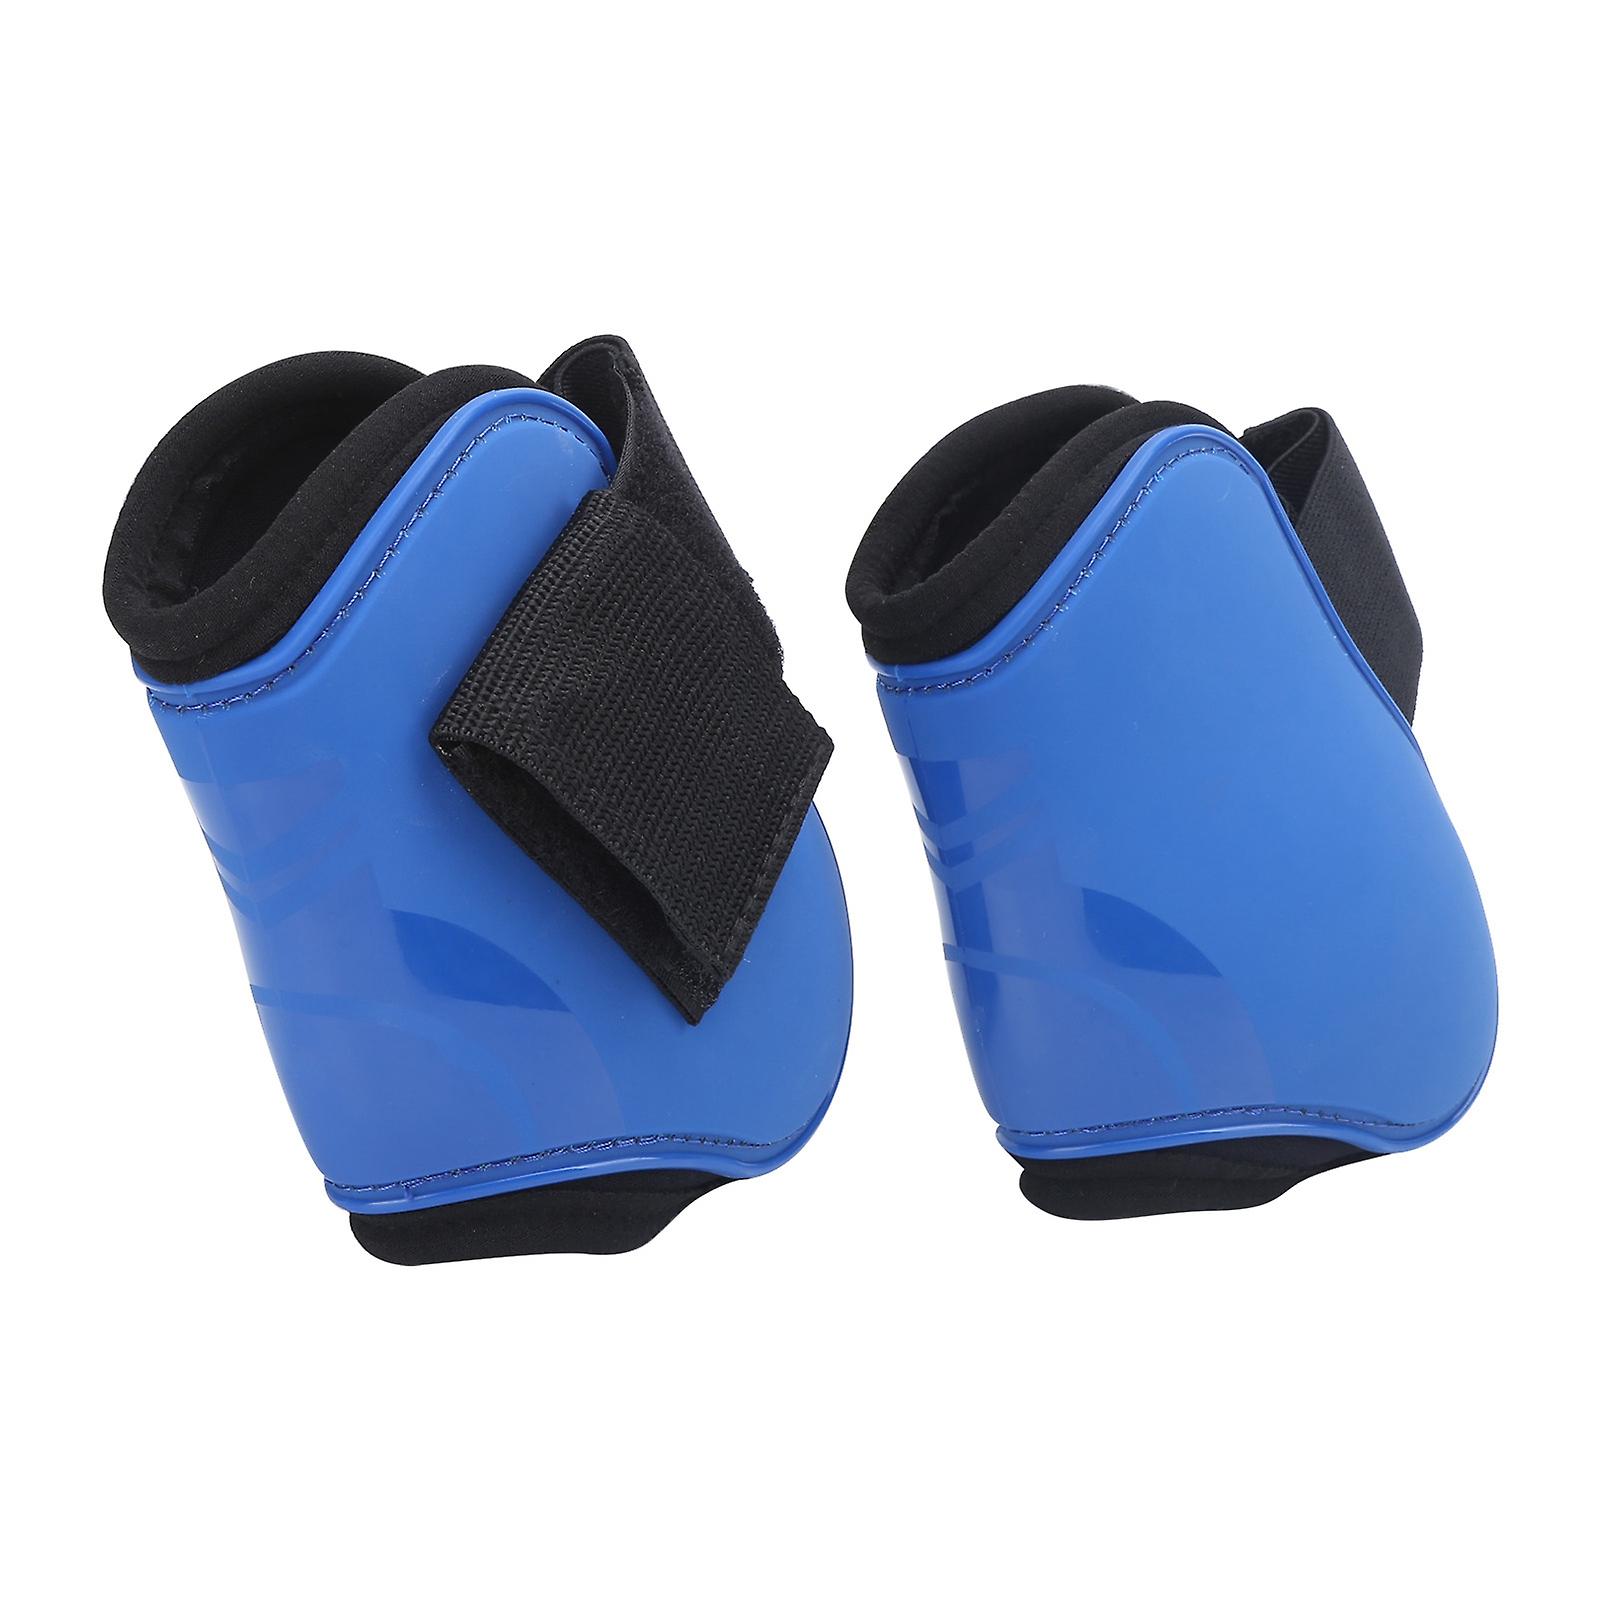 Horse Tendon Boots Pu Thicken Shell Boots Horse Leg Protection For Jumping Riding Competitionblue Xl Hind